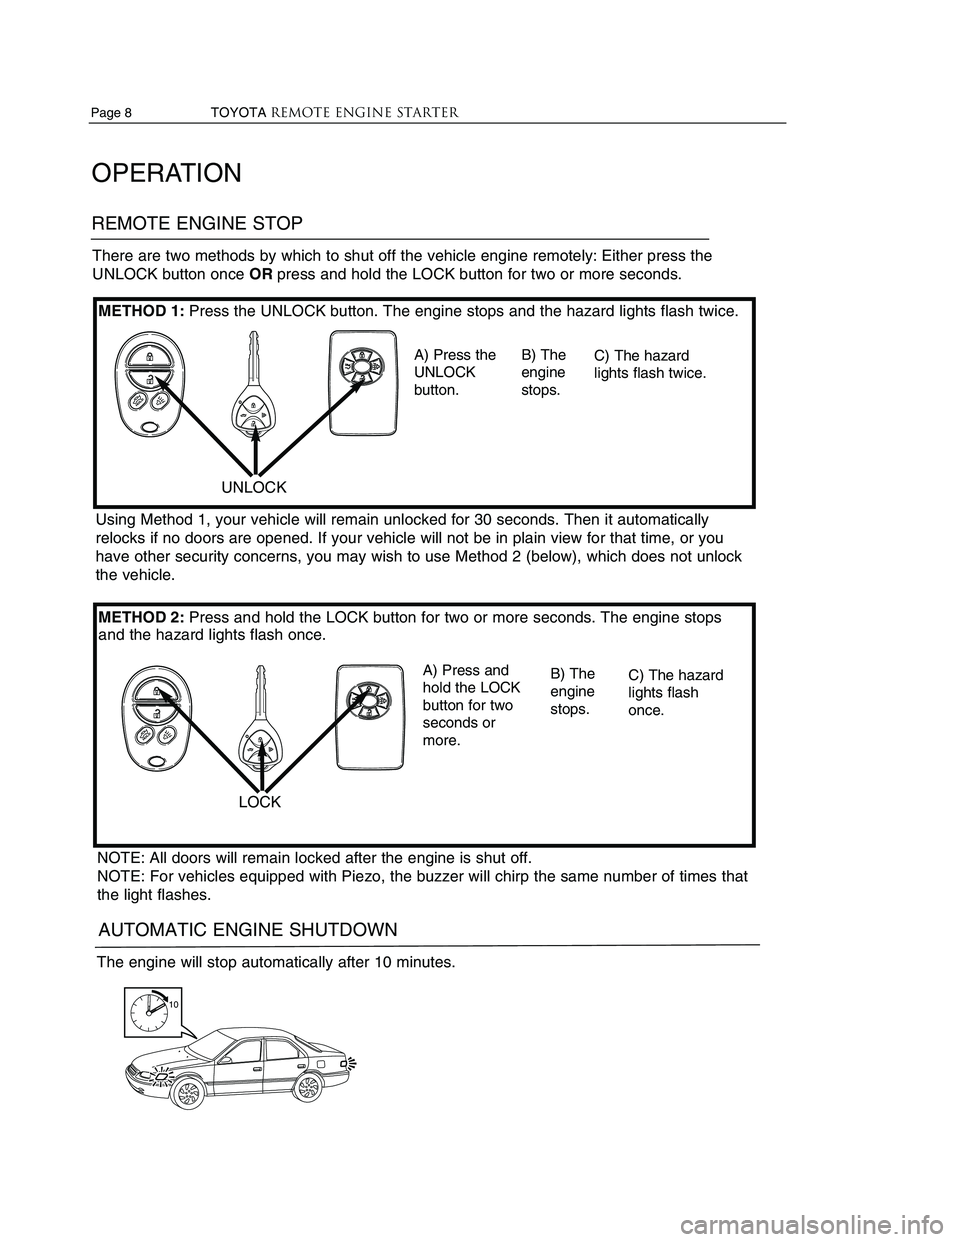 TOYOTA VENZA 2010  Accessories, Audio & Navigation (in English) Page 8                    TOYOTAREMOTE ENGINE STARTERTOYOTAREMOTE ENGINE STARTER Page 5
OPERATION
BEFORE STARTING THE ENGINE
The shift lever is in the “P” position.
(Without Push Start)
The key is